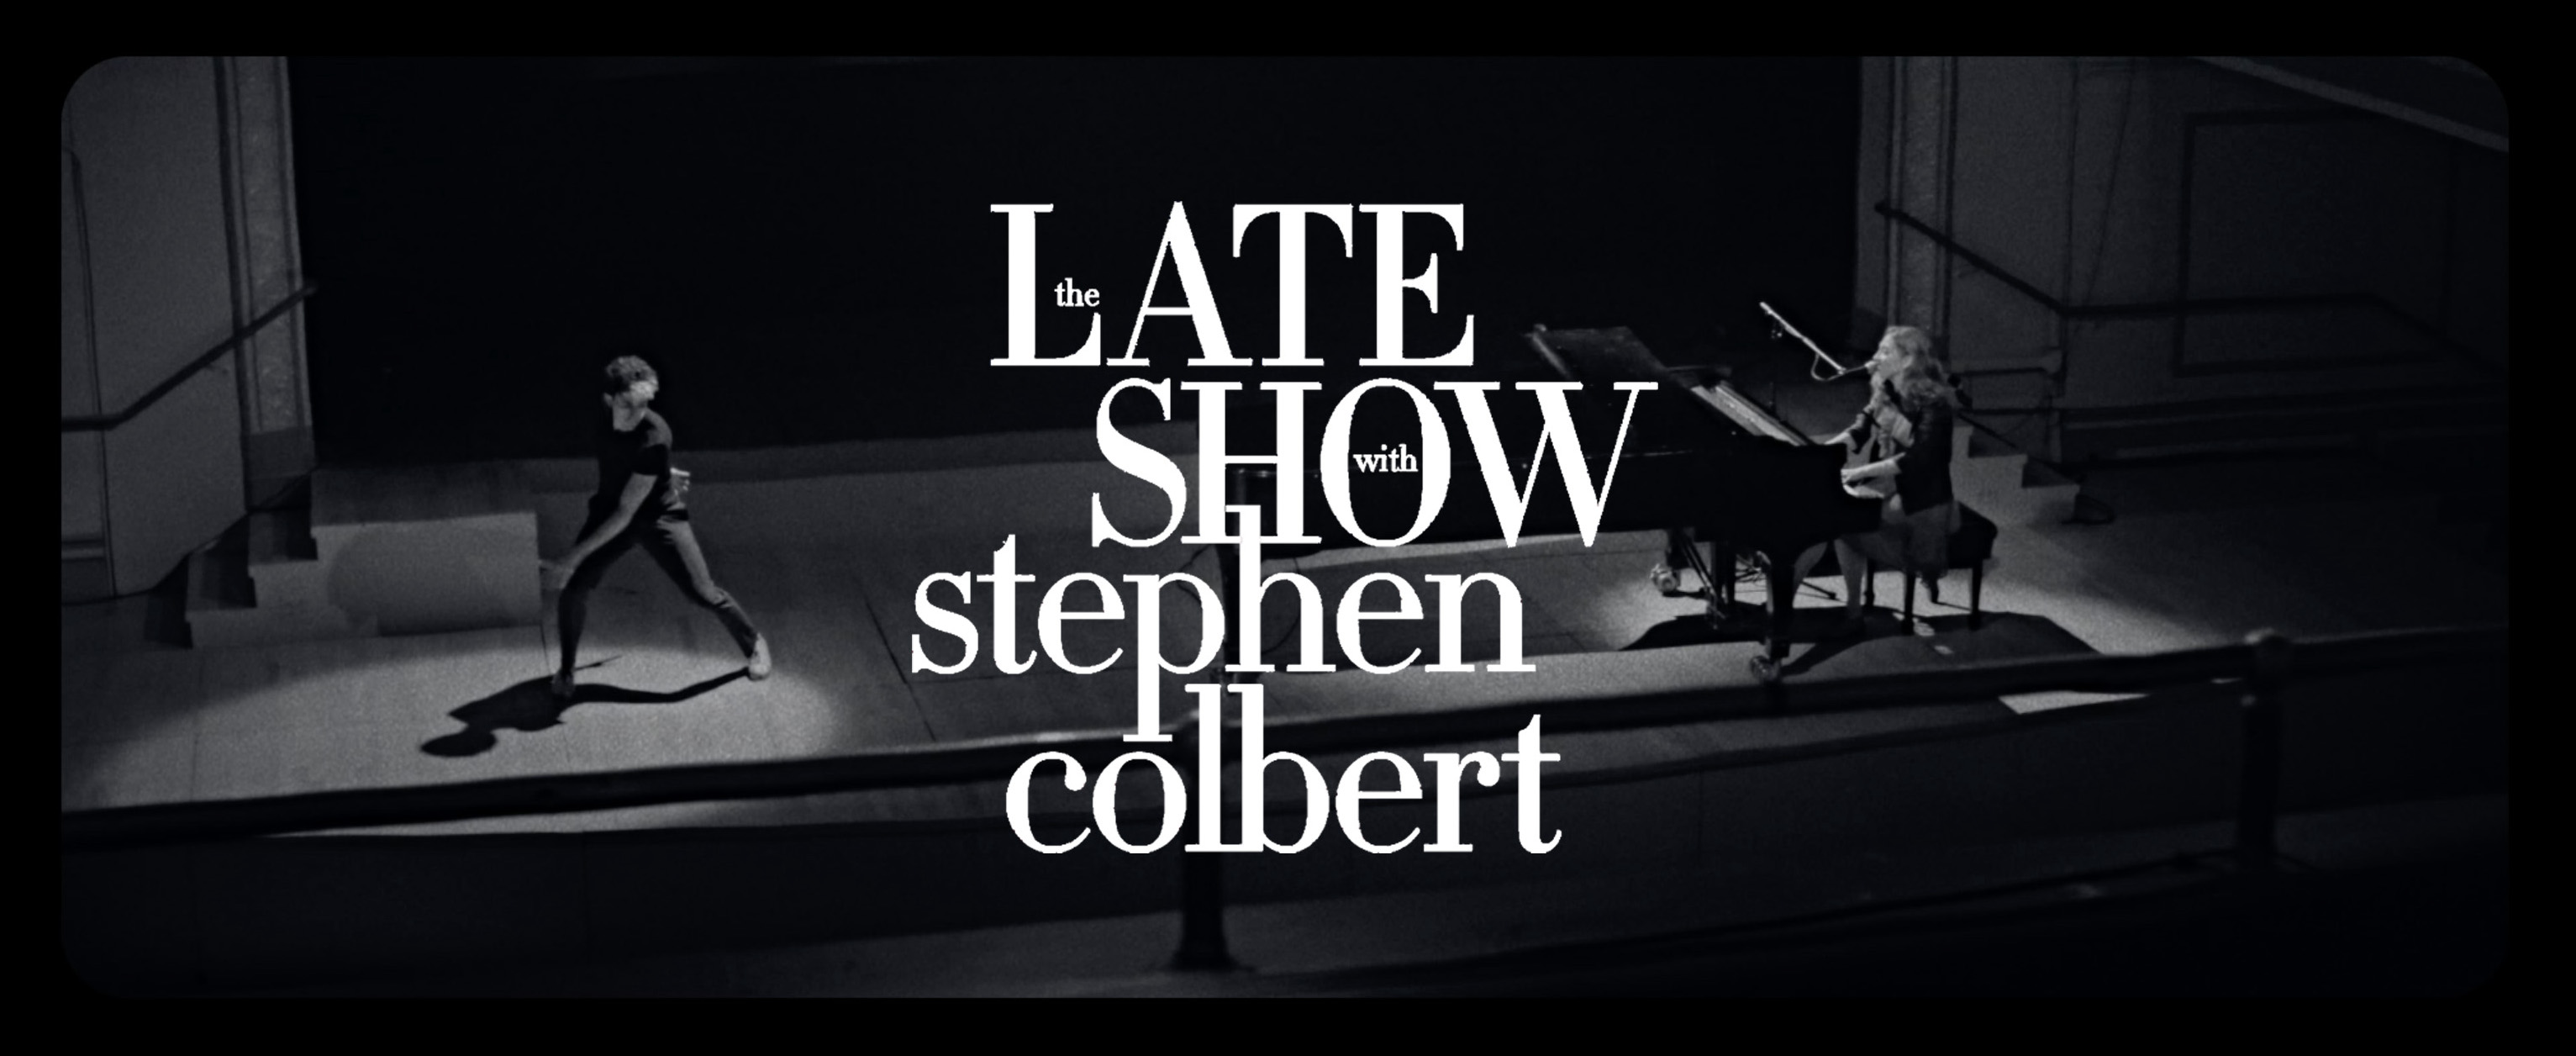 A Late Show with Stephen Colbert